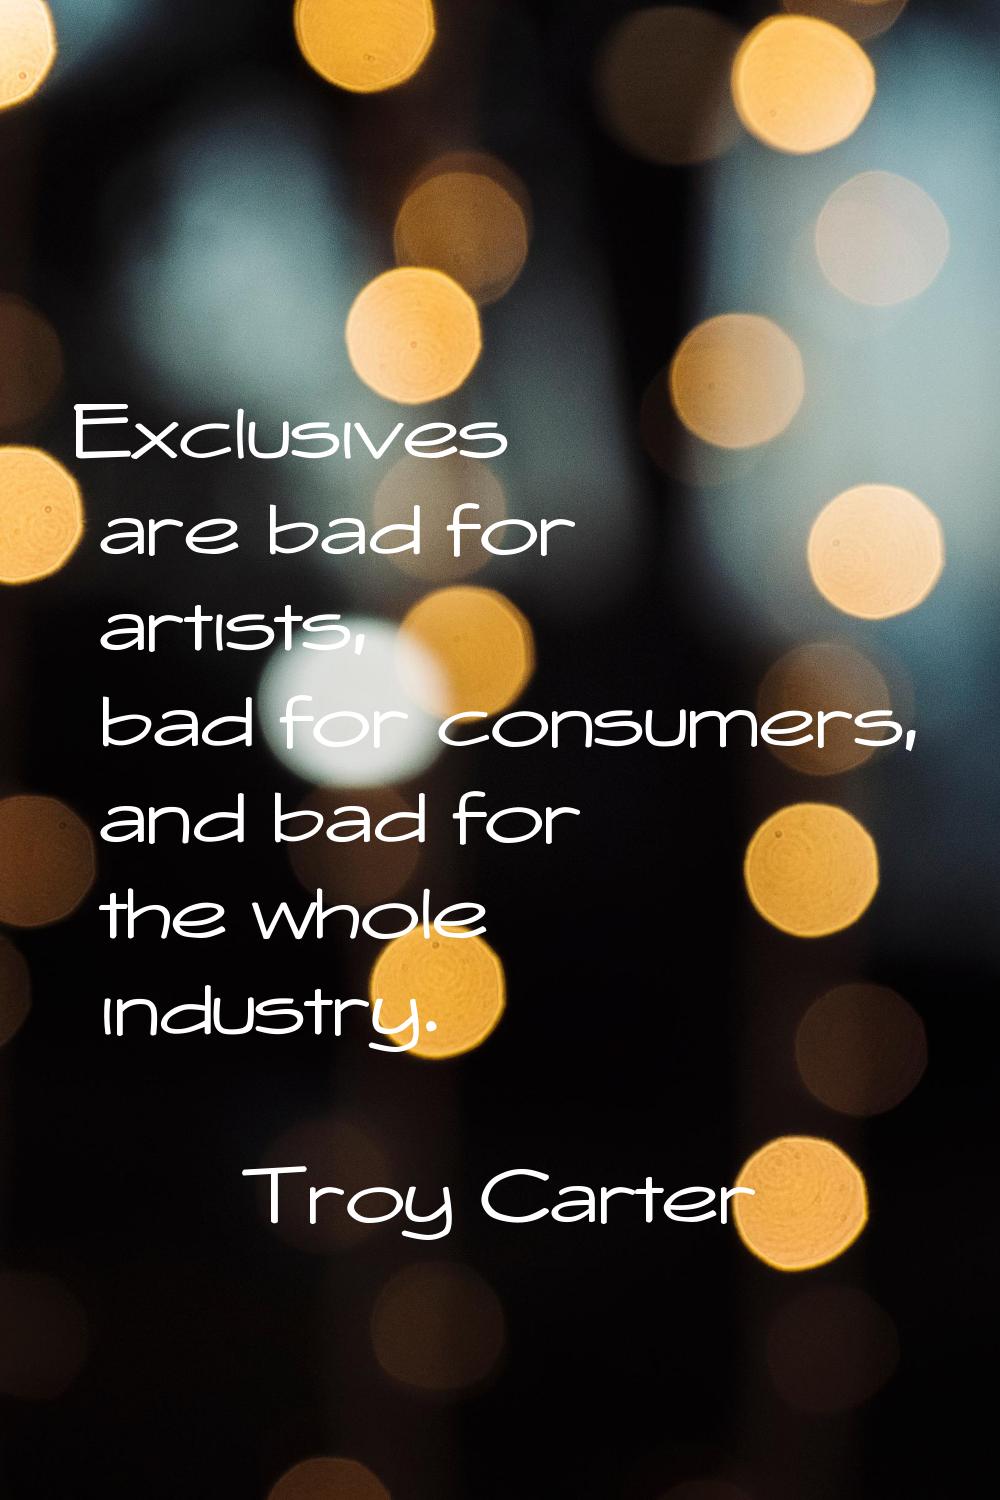 Exclusives are bad for artists, bad for consumers, and bad for the whole industry.